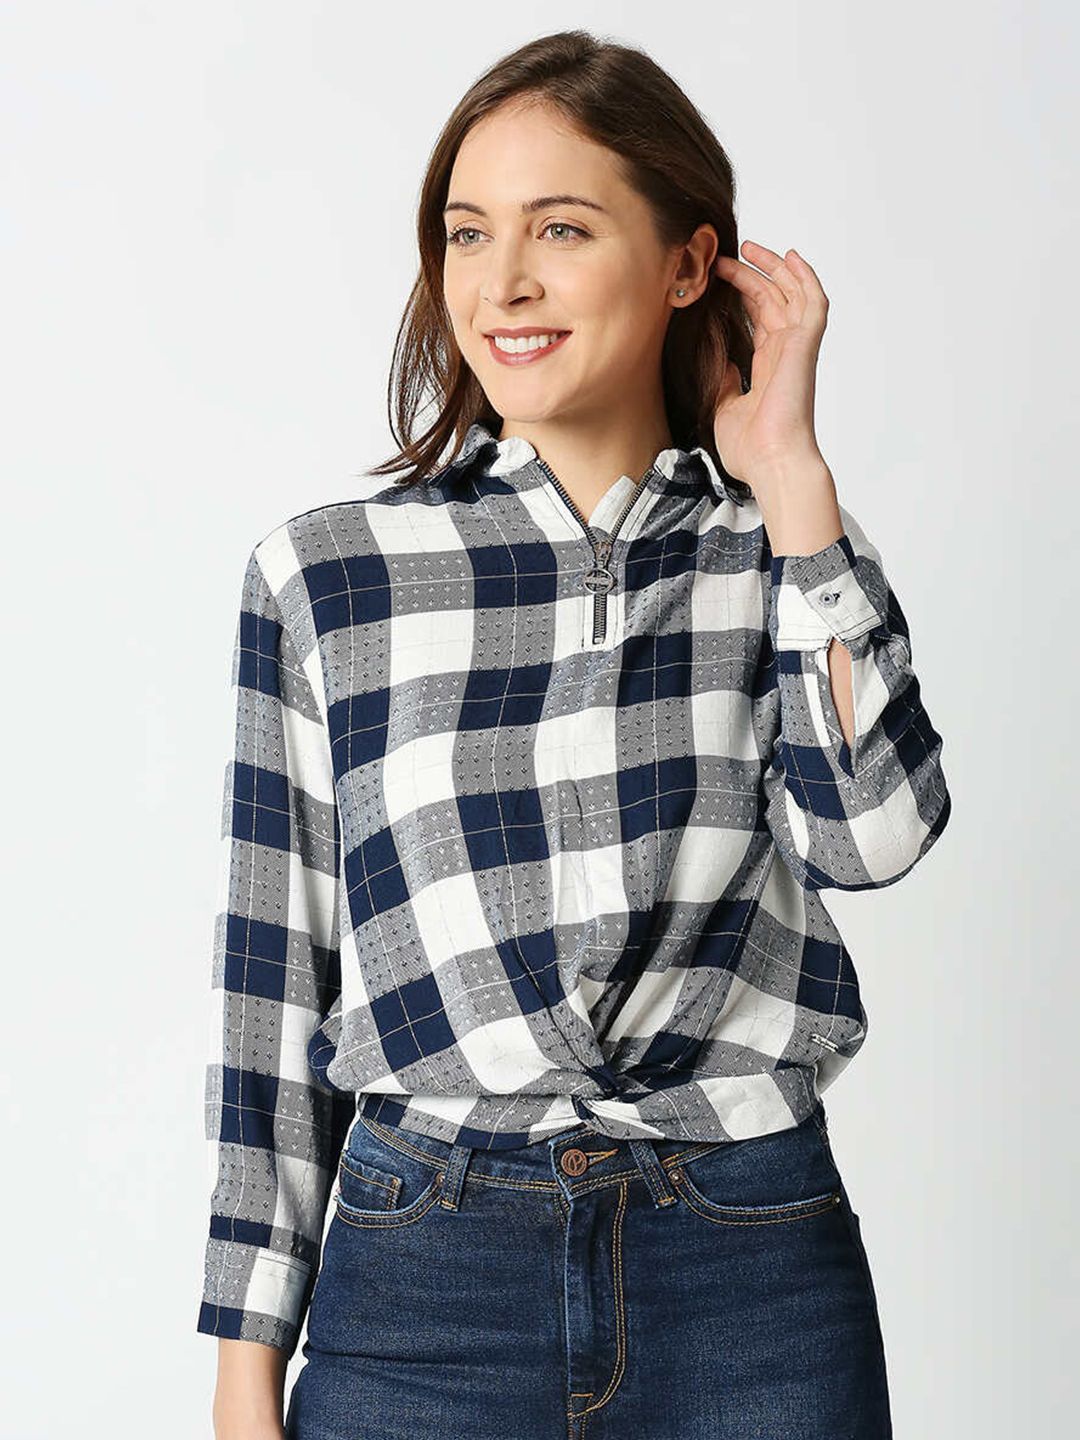 Pepe Jeans Blue & White Checked Shirt Style Top Price in India